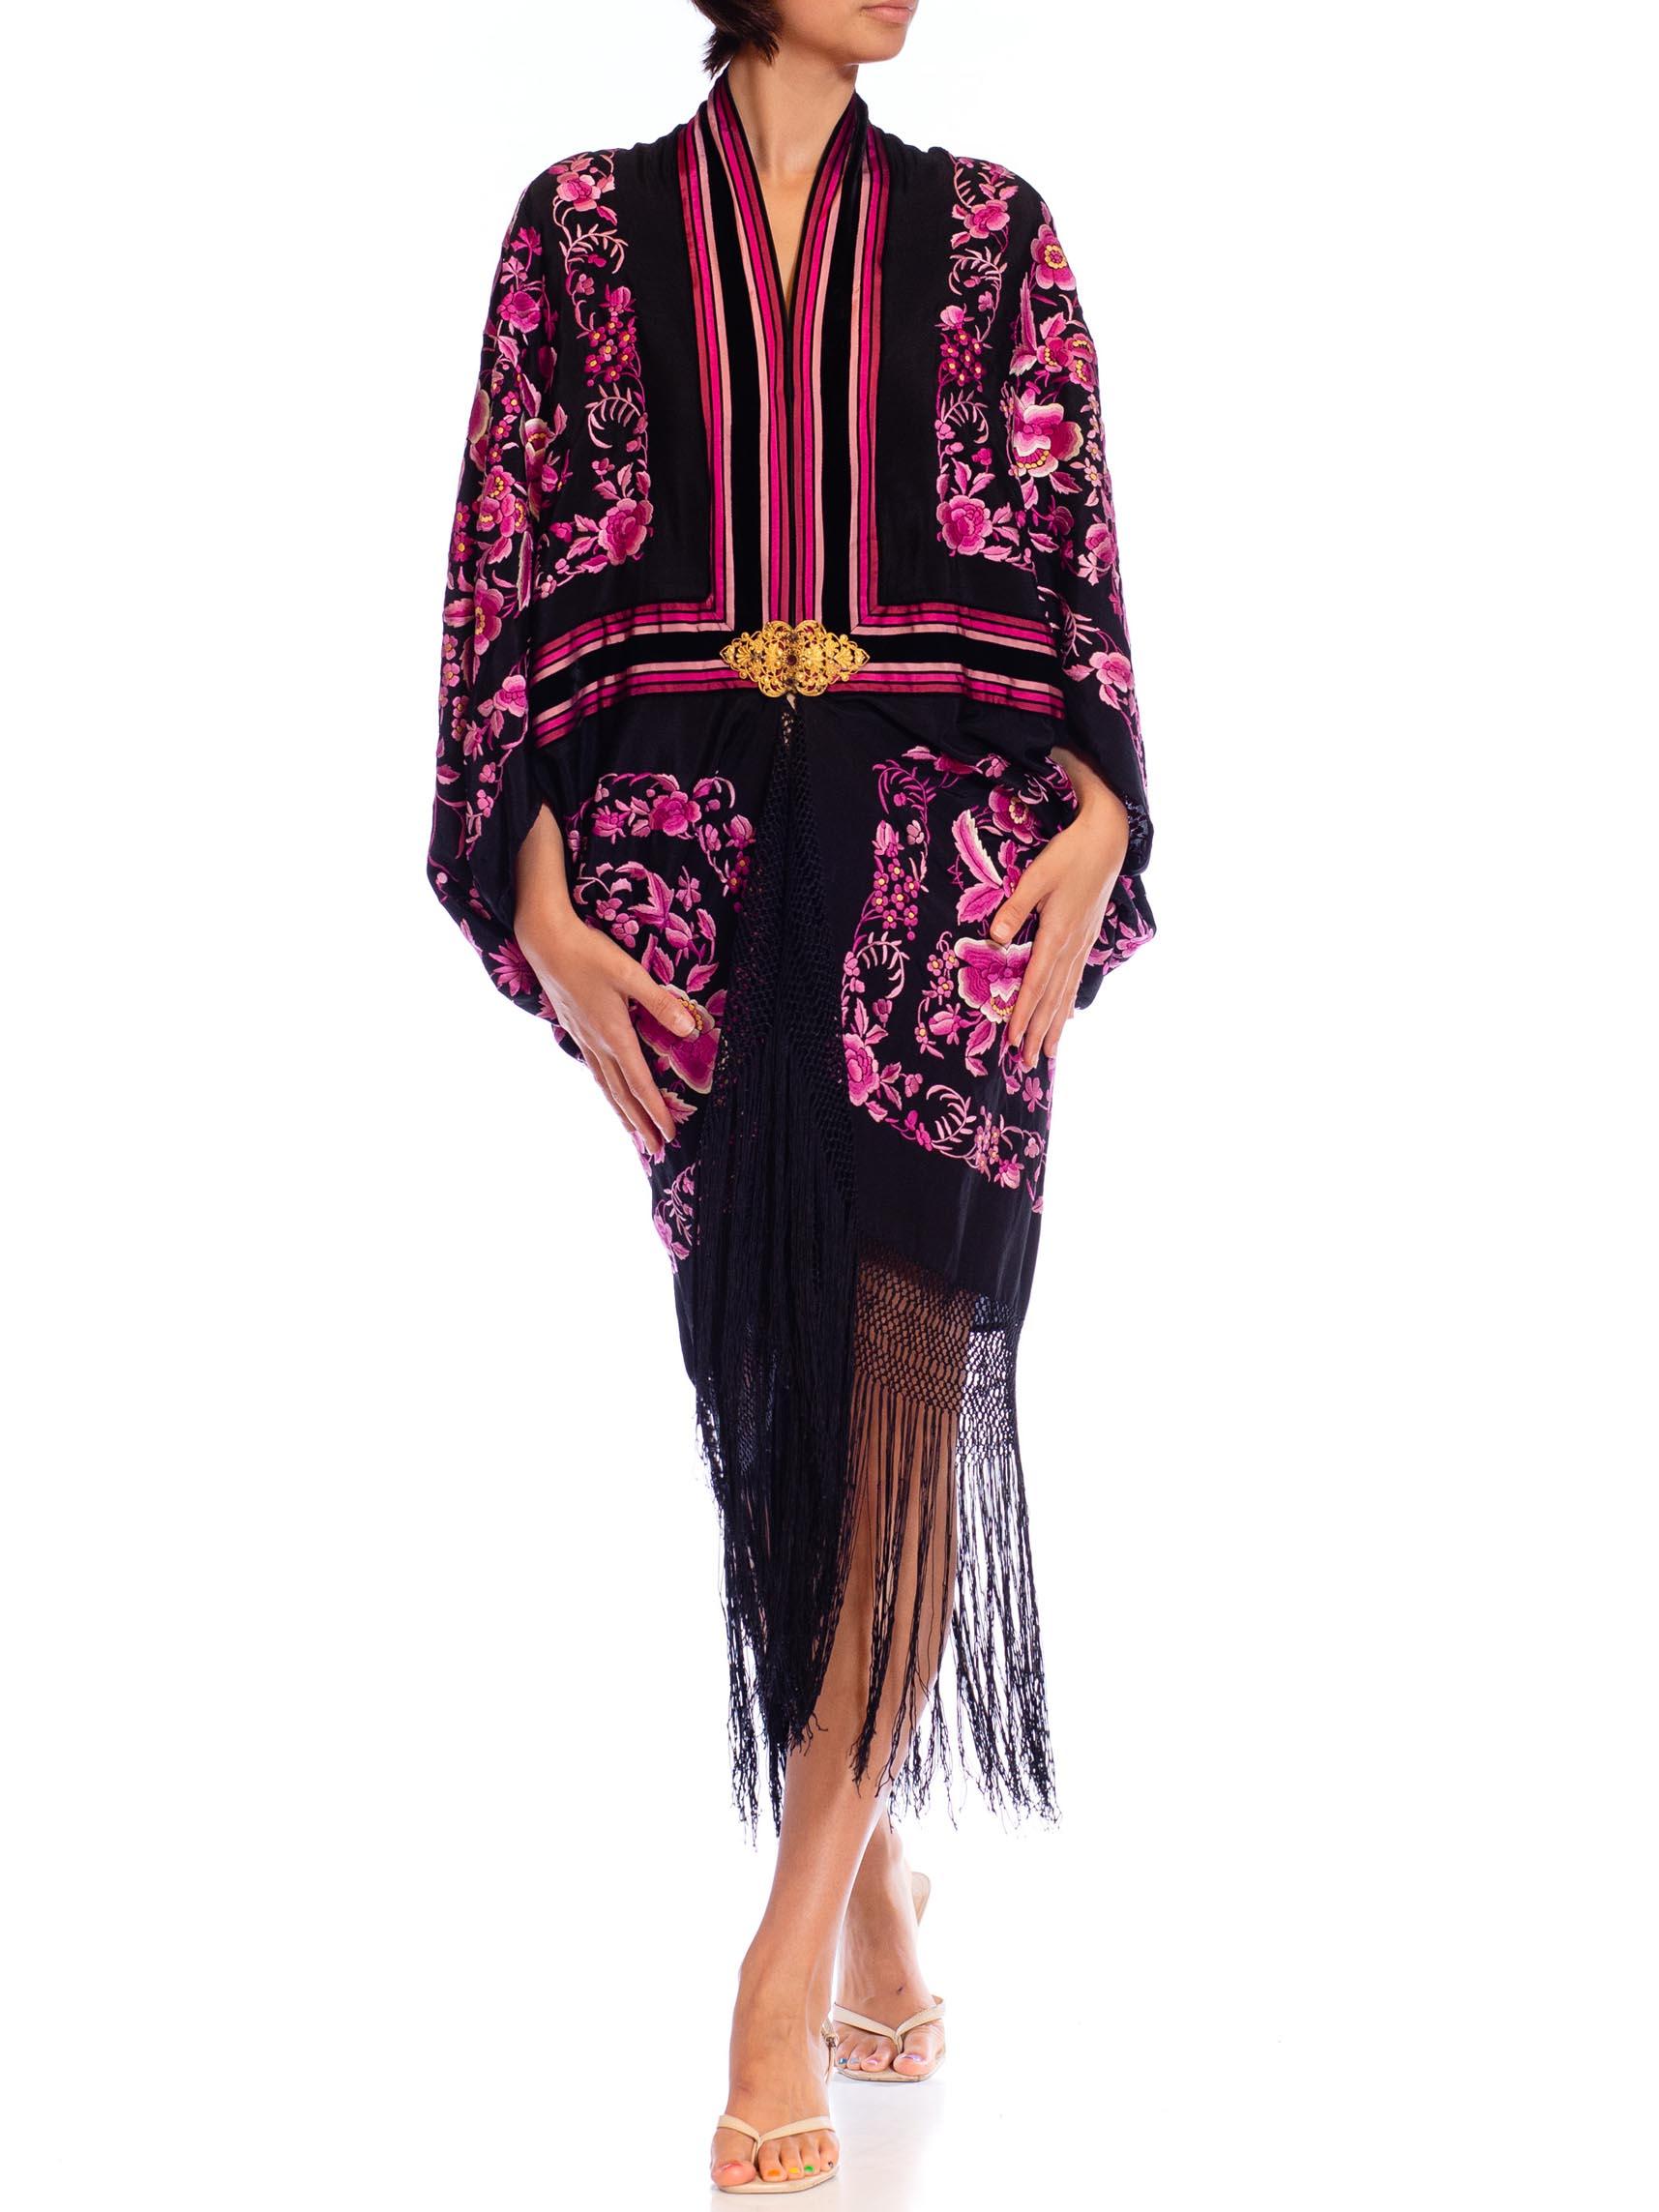 MORPHEW COLLECTION Lilac & Black Silk Embroidered Floral Cocoon With Fringe Gol For Sale 4